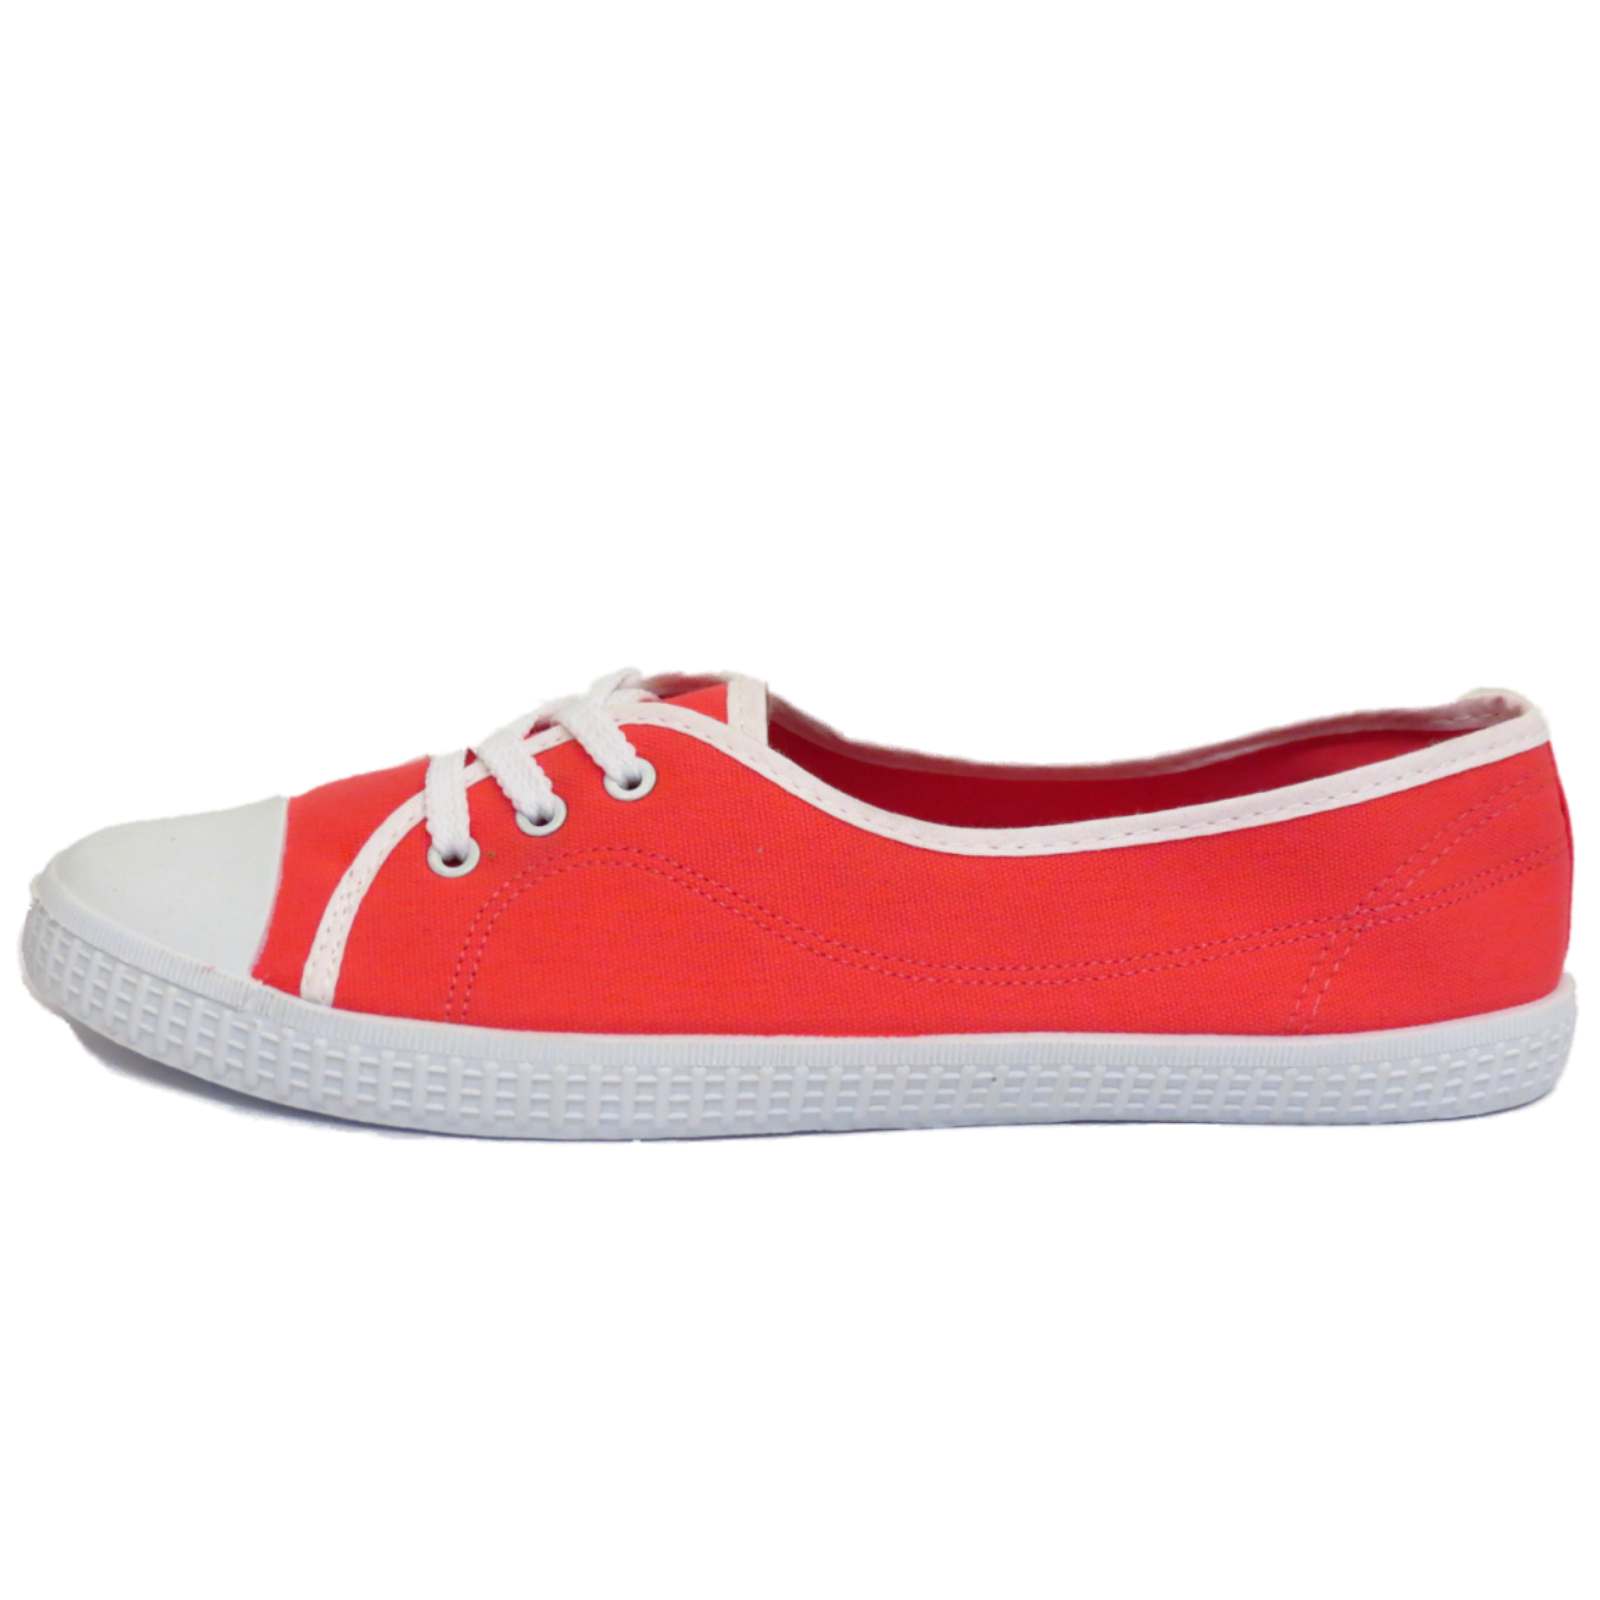 LADIES RED SLIP-ON CANVAS FLAT TRAINER PLIMSOLL PUMPS CASUAL SHOES ...